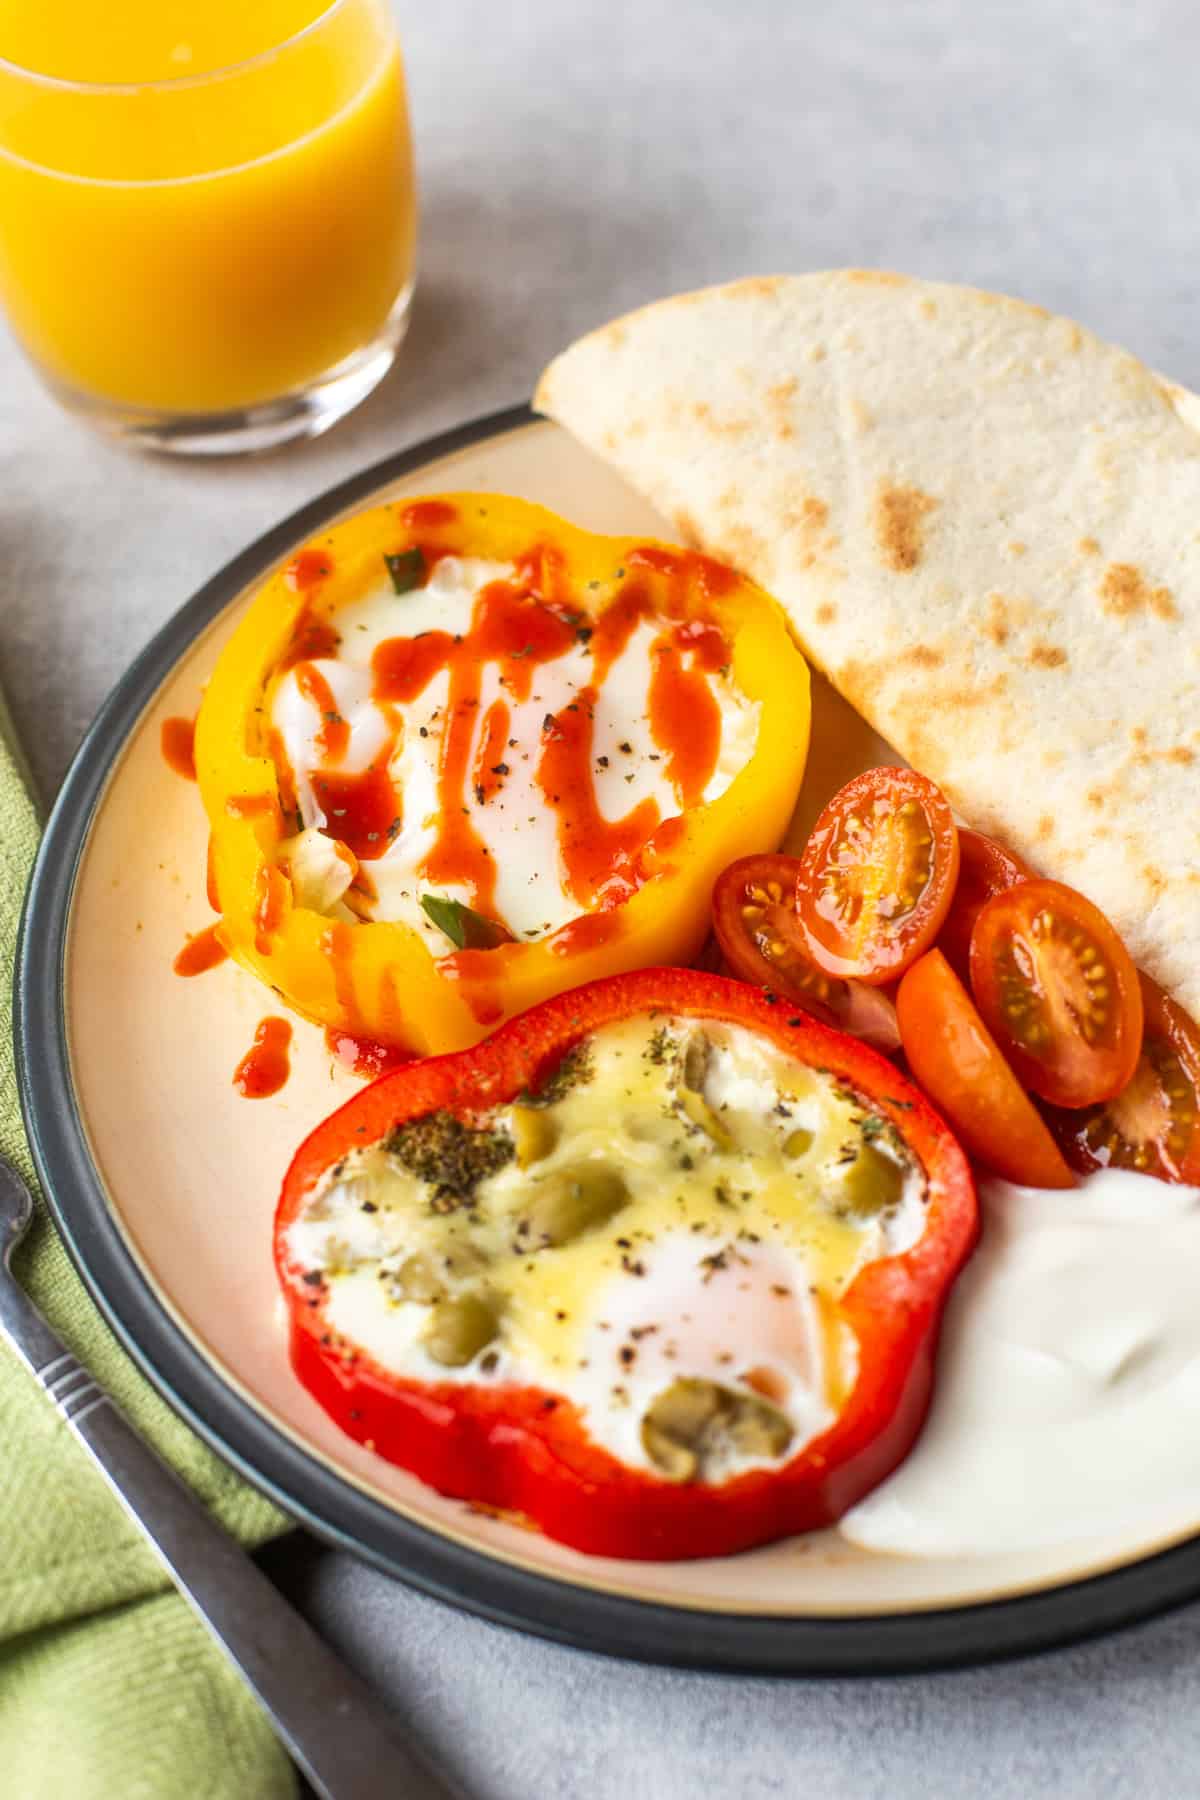 Pepper fried eggs on a plate with tomatoes and tortilla.